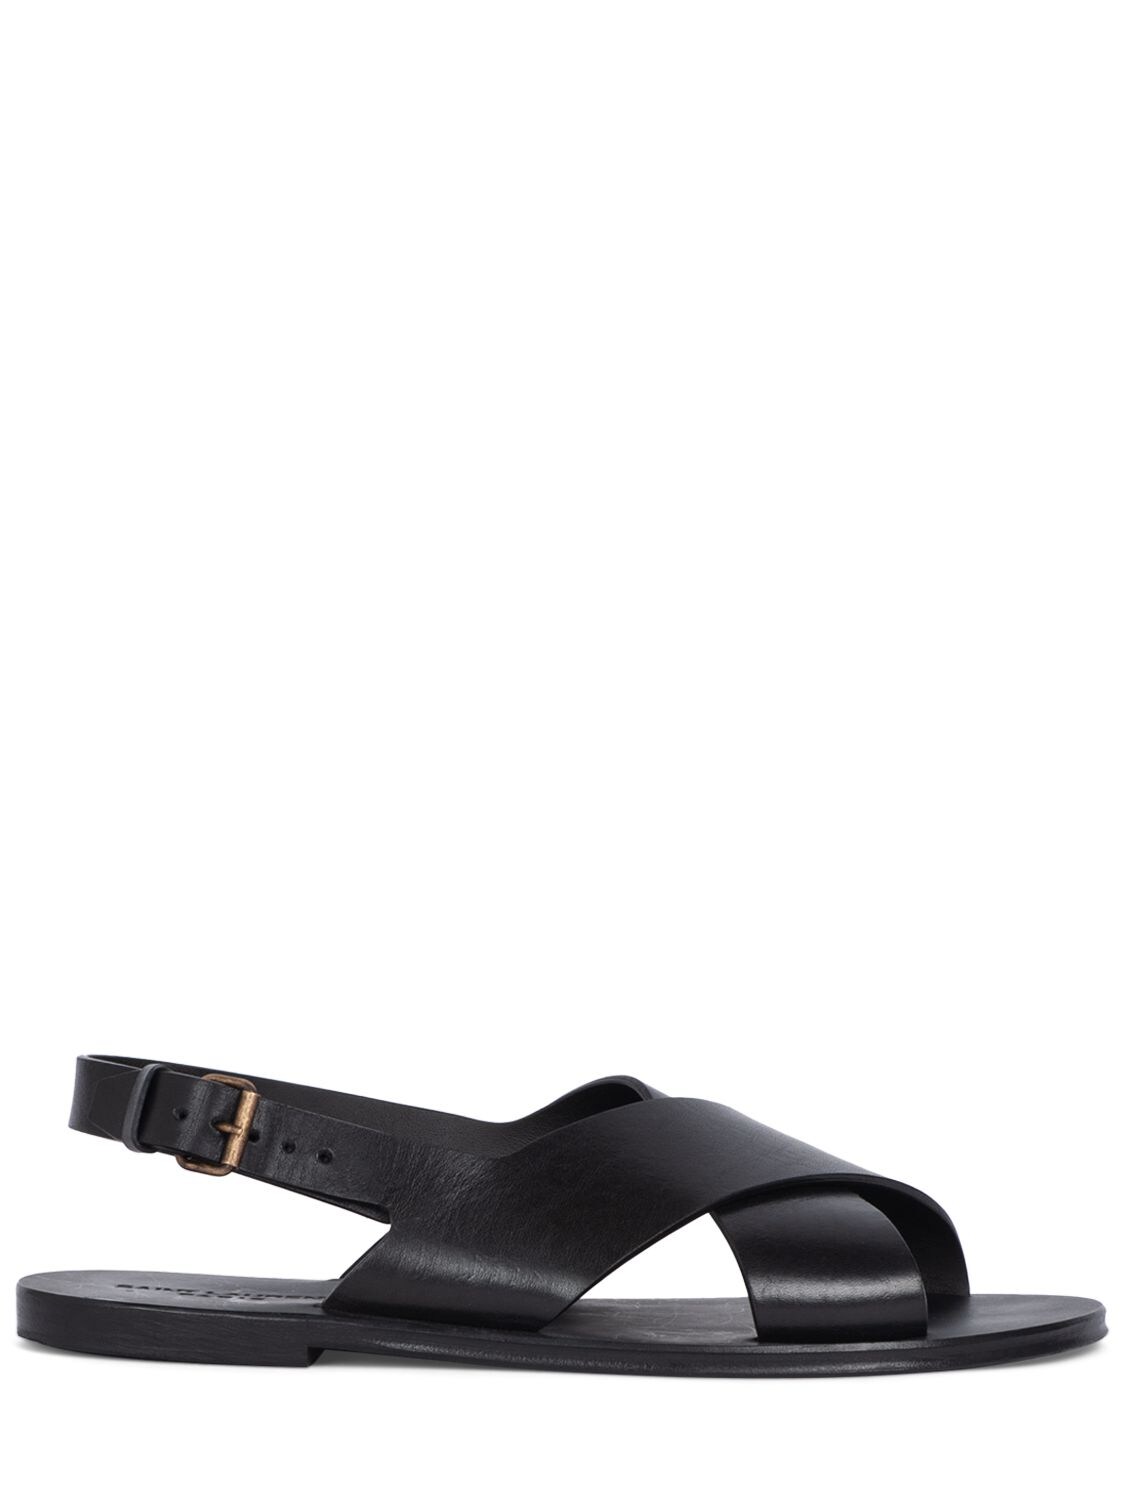 Image of Mojave Leather Sandals